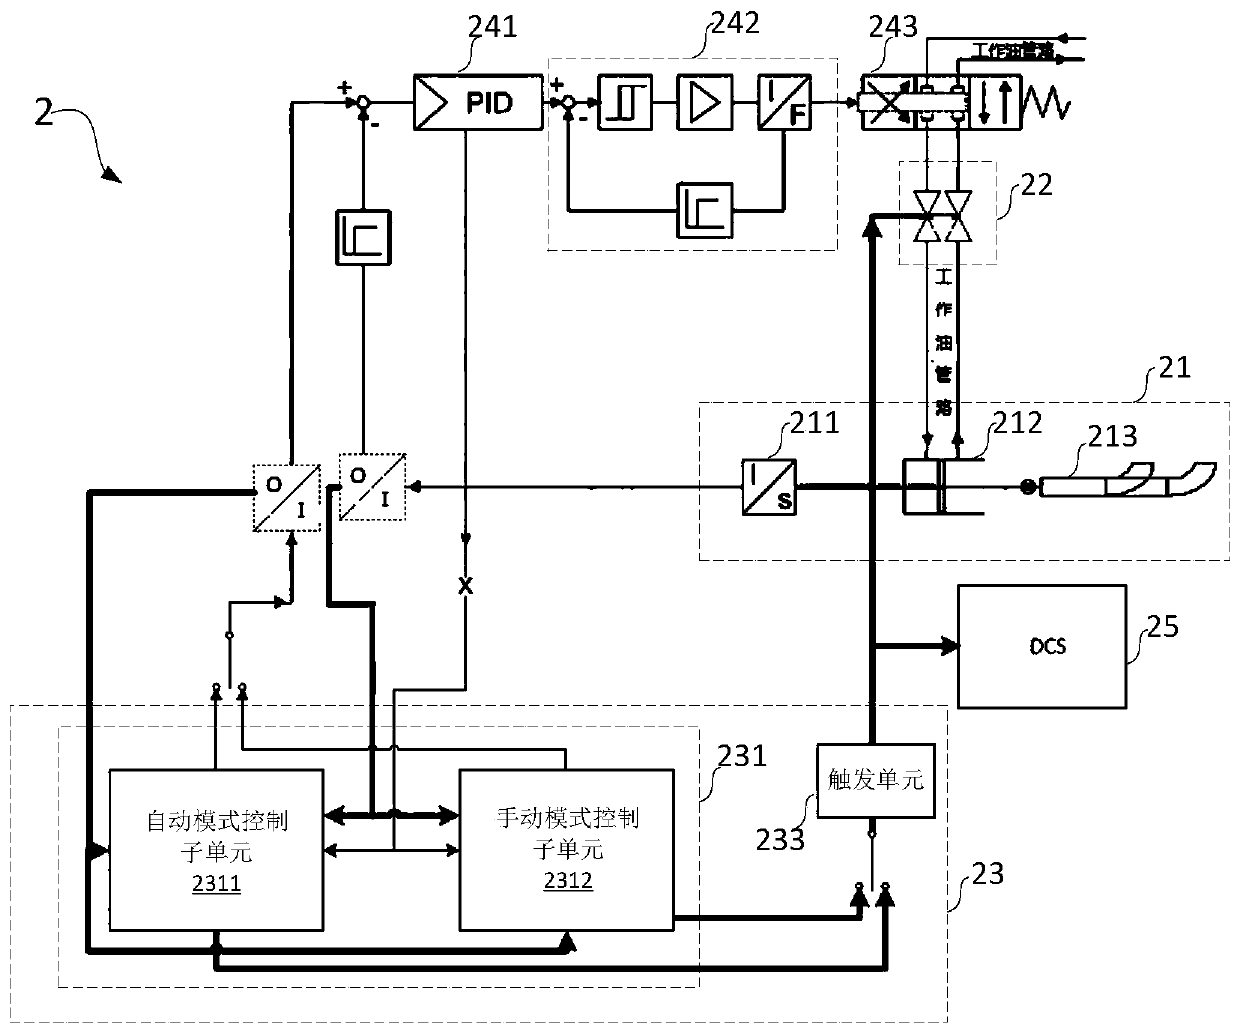 A speed maintaining device and system for nuclear power feed water pump set